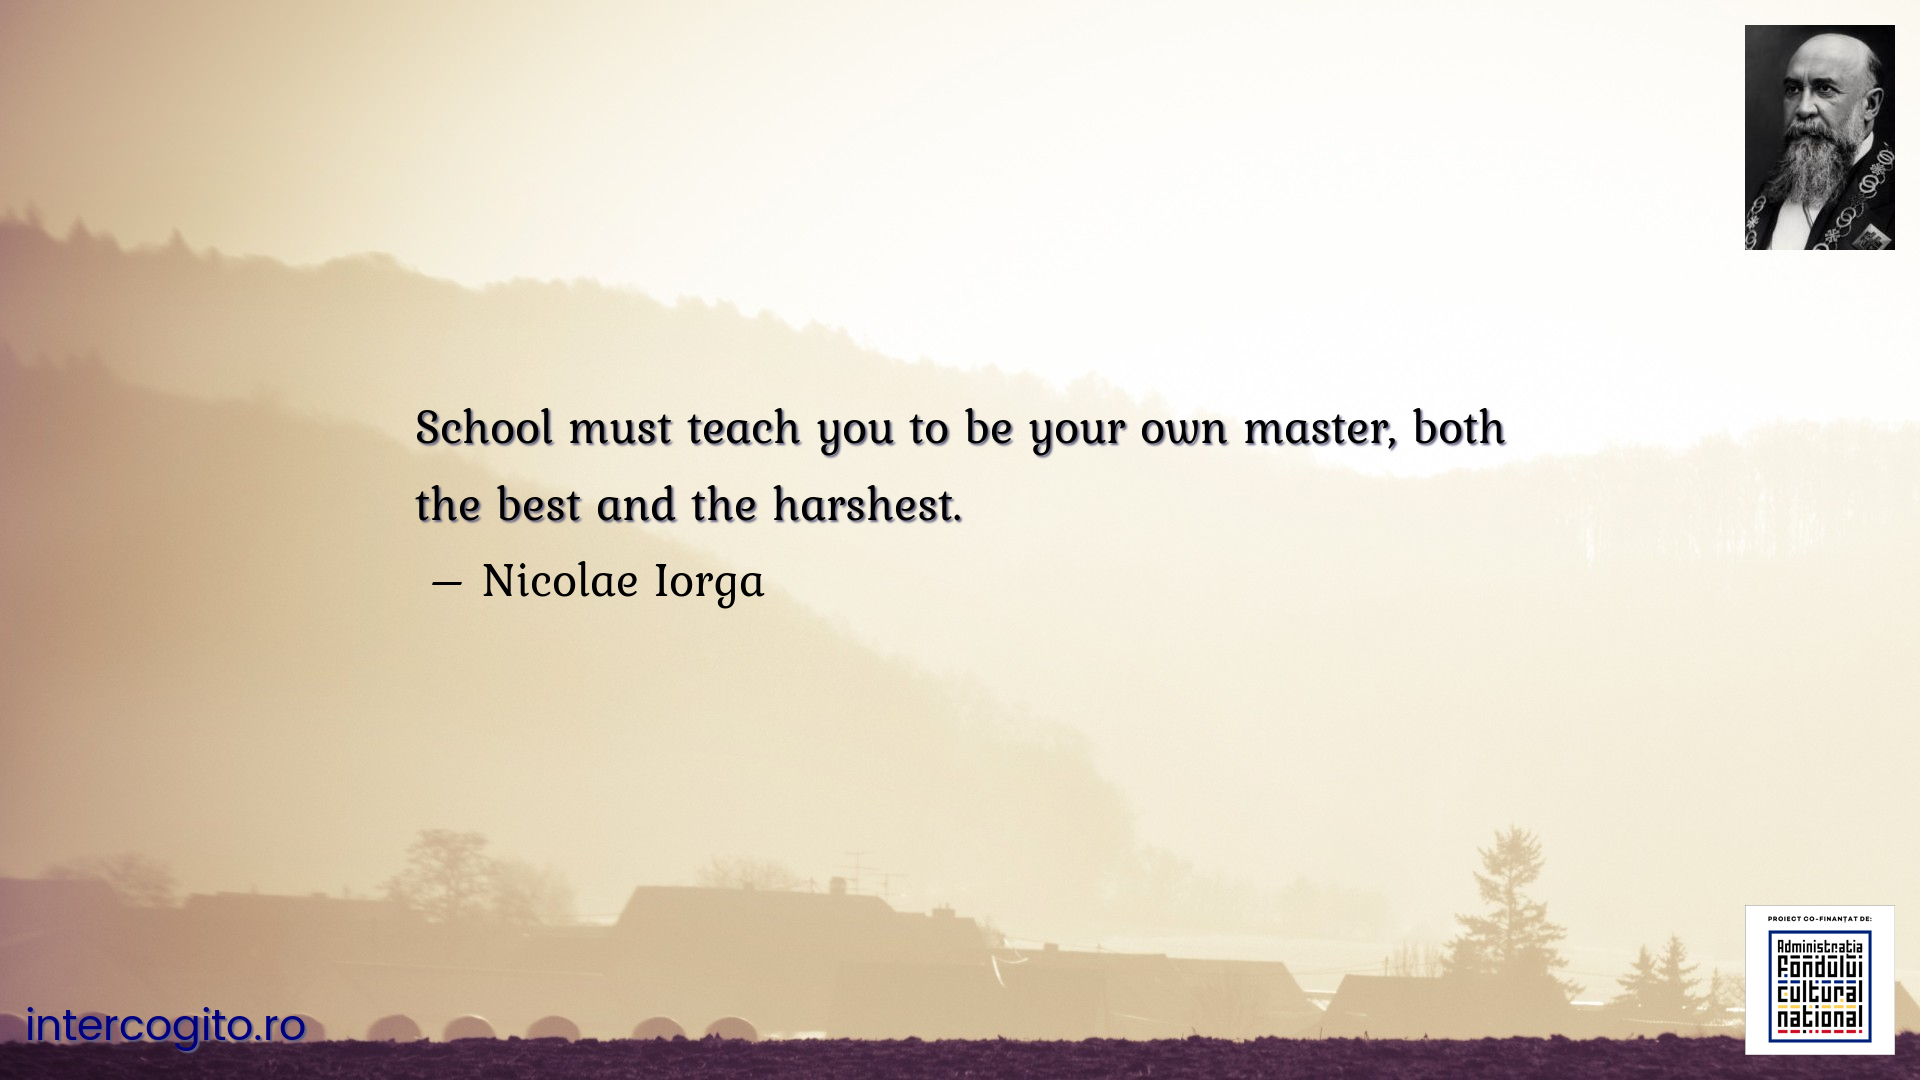 School must teach you to be your own master, both the best and the harshest.